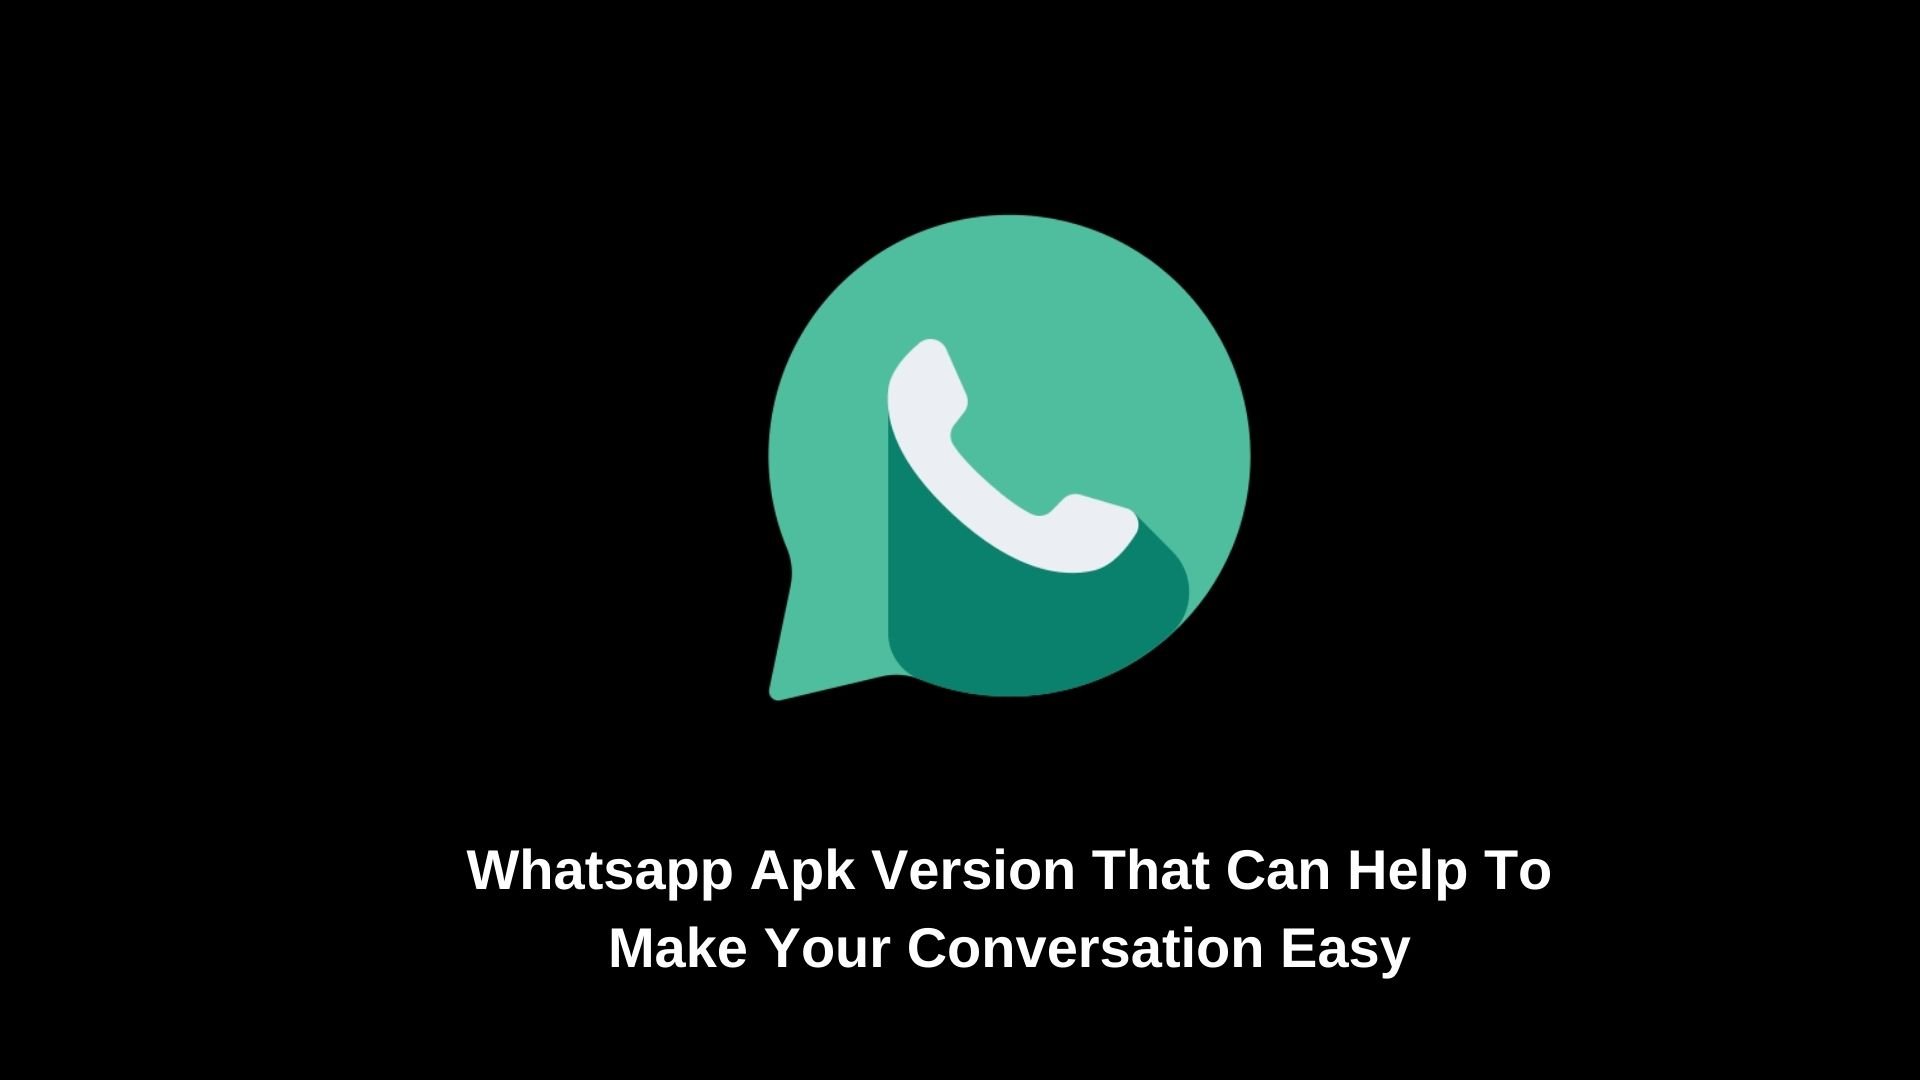 Whatsapp Apk Version That Can Help To Make Your Conversation Easy